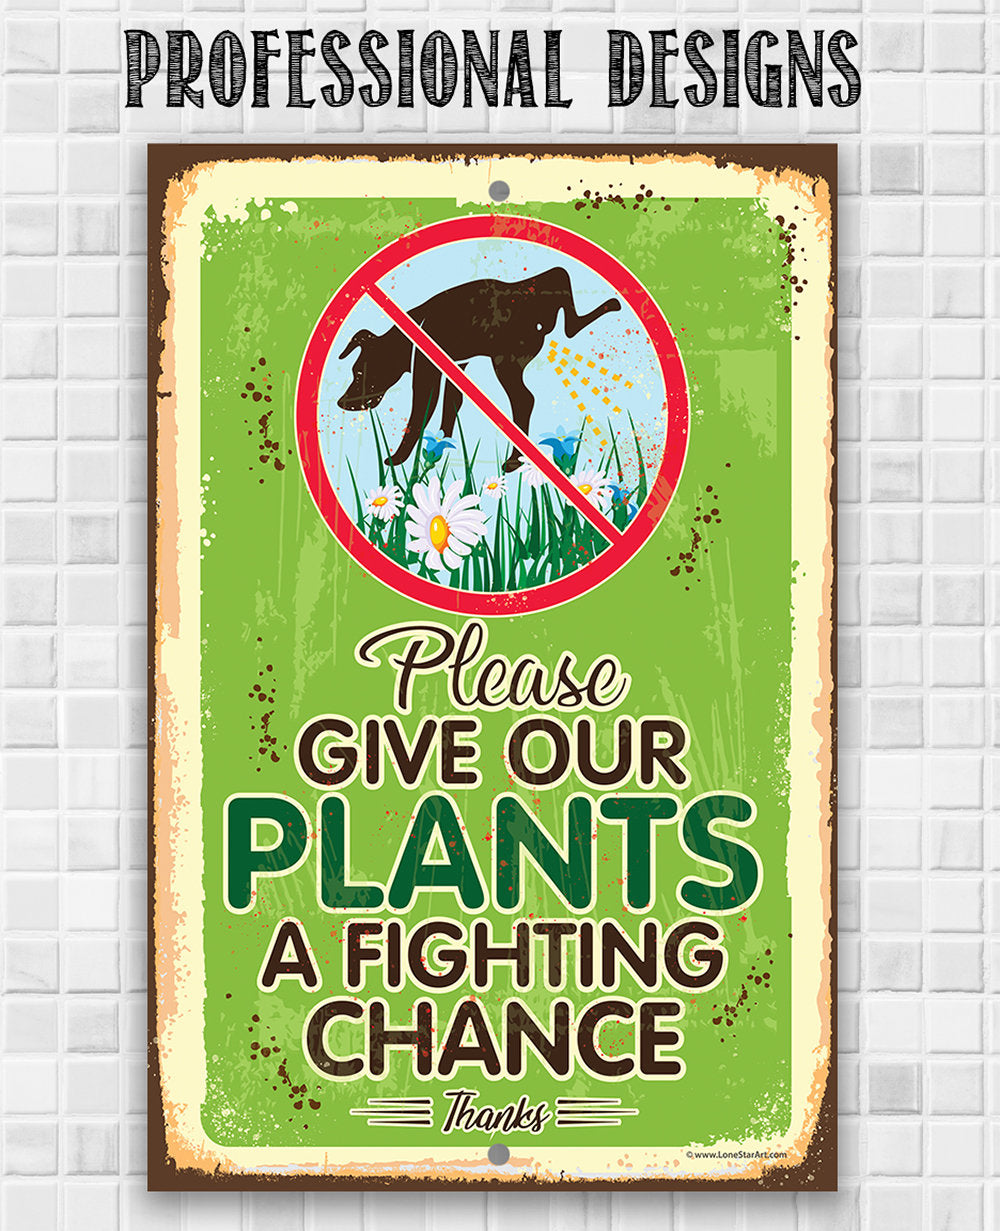 Please Give Our Plants a Fighting Chance - Do Not Pee or Poop Here Signage - 8" x 12" or 12" x 18" Aluminum Tin Awesome Metal Poster